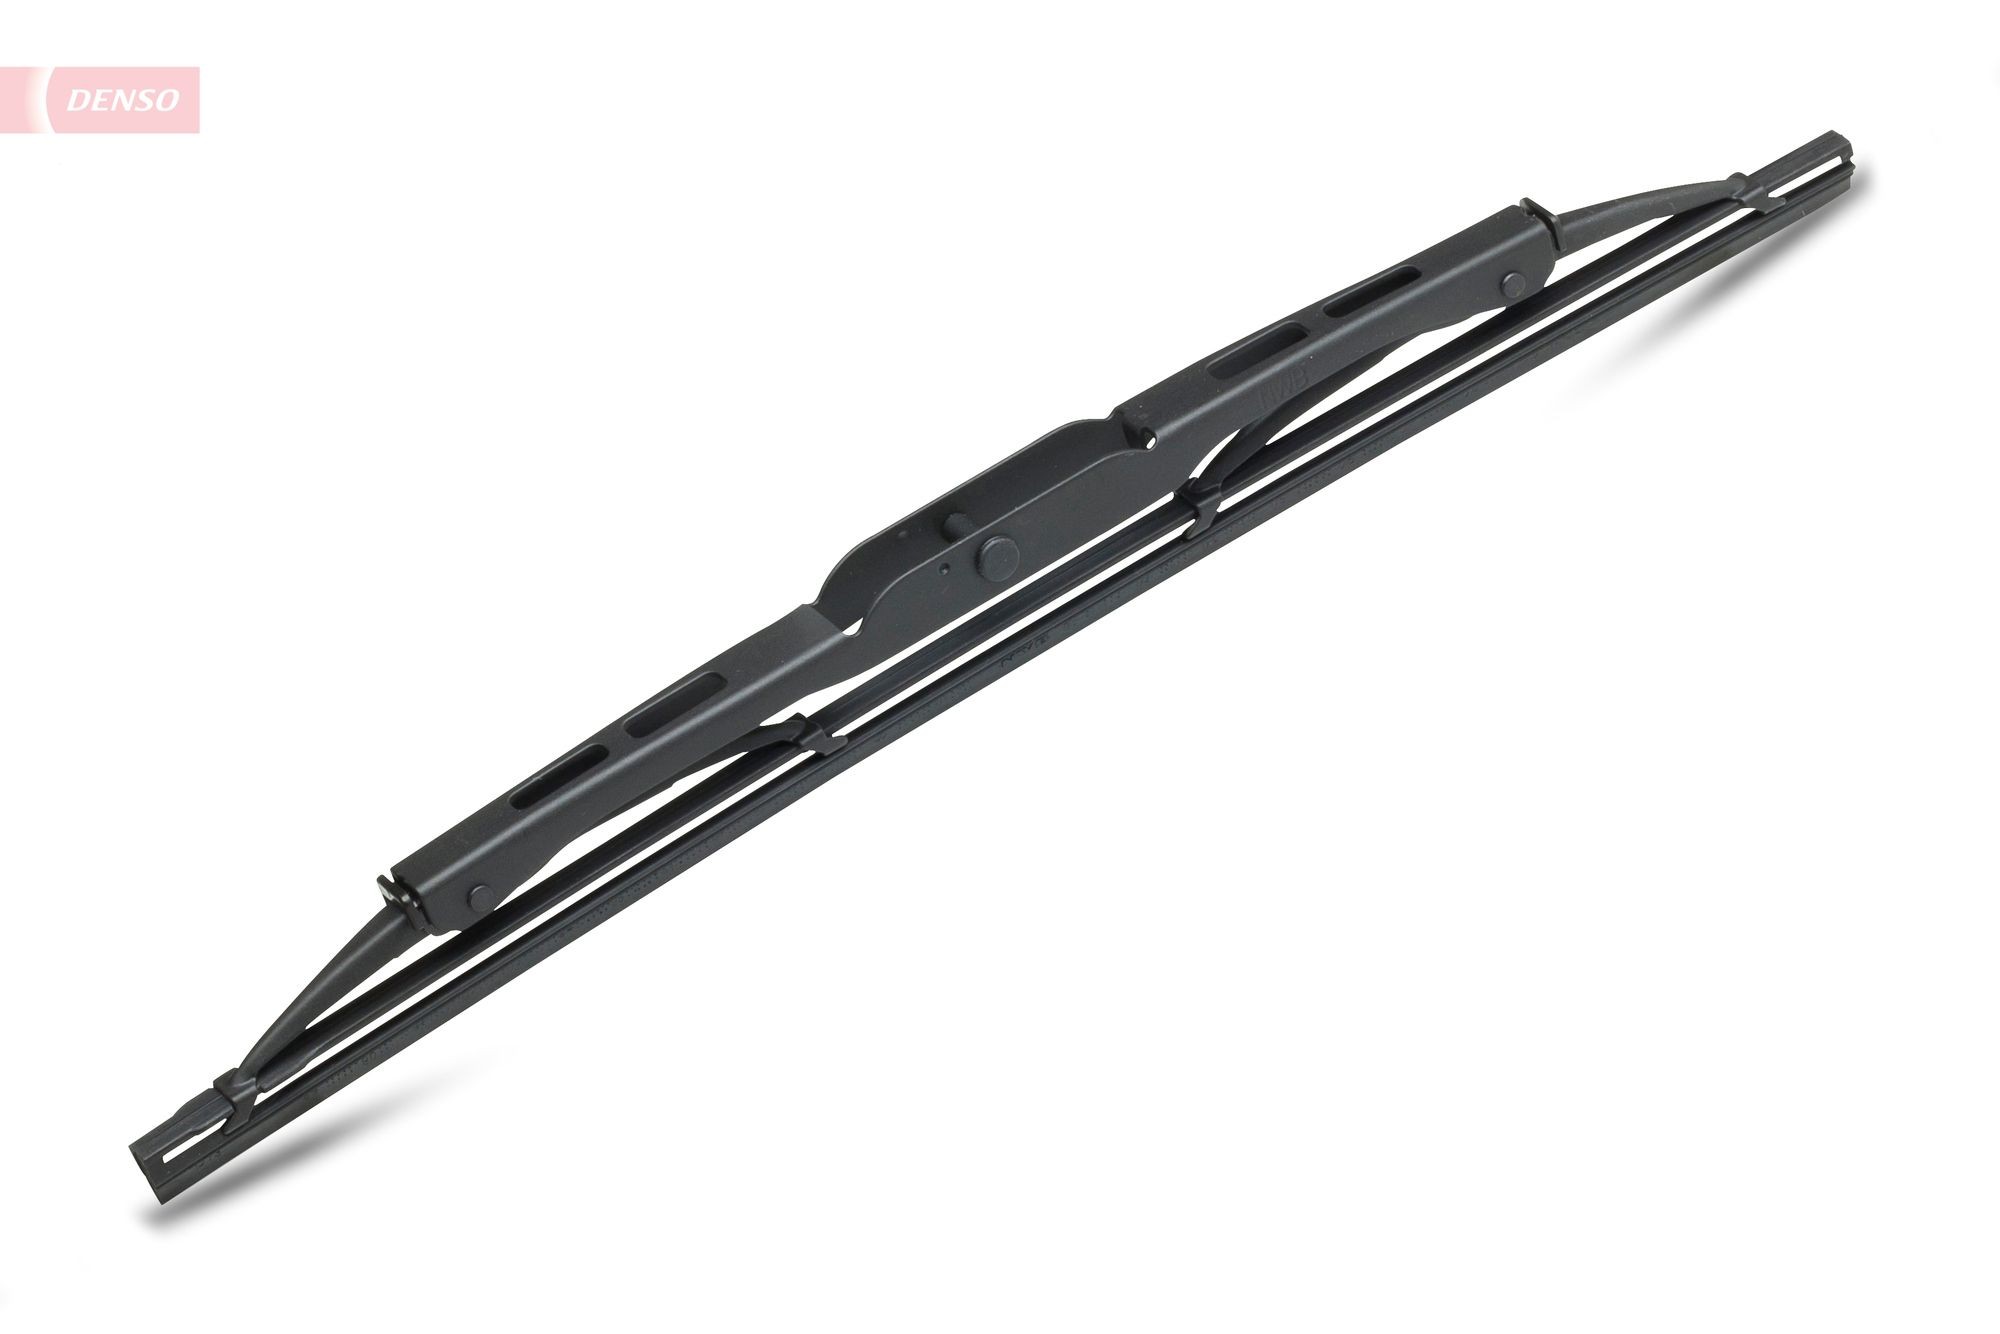 Nissan PATROL Windscreen cleaning system parts - Wiper blade DENSO DM-030